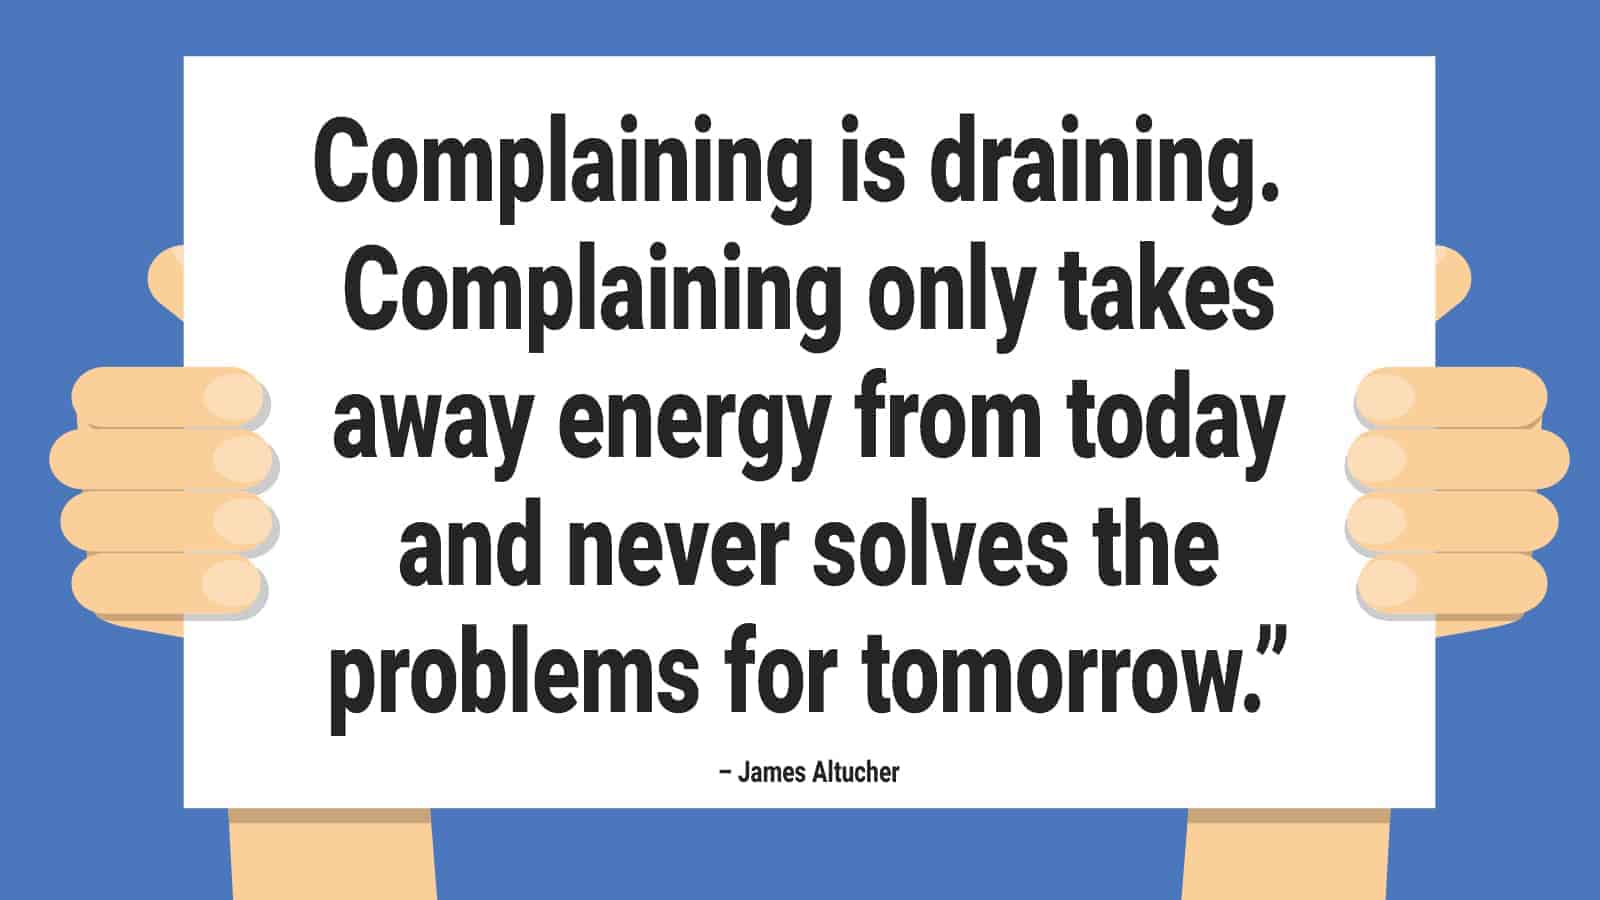 7 Comebacks for Dealing With A Complainer